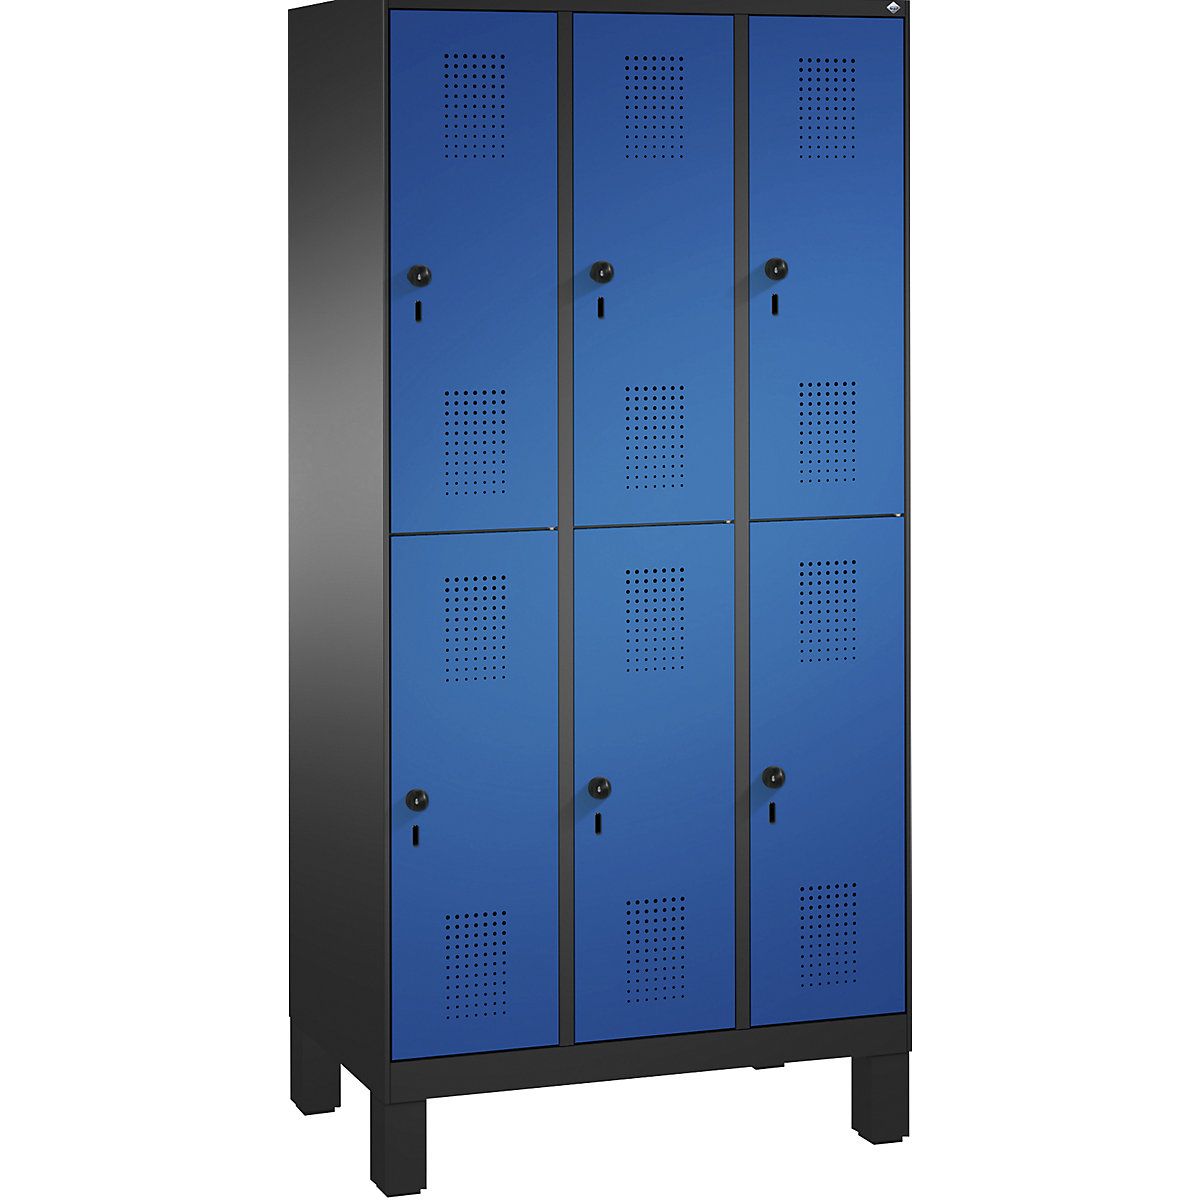 EVOLO cloakroom locker, double tier, with feet – C+P, 3 compartments, 2 shelf compartments each, compartment width 300 mm, black grey / gentian blue-14